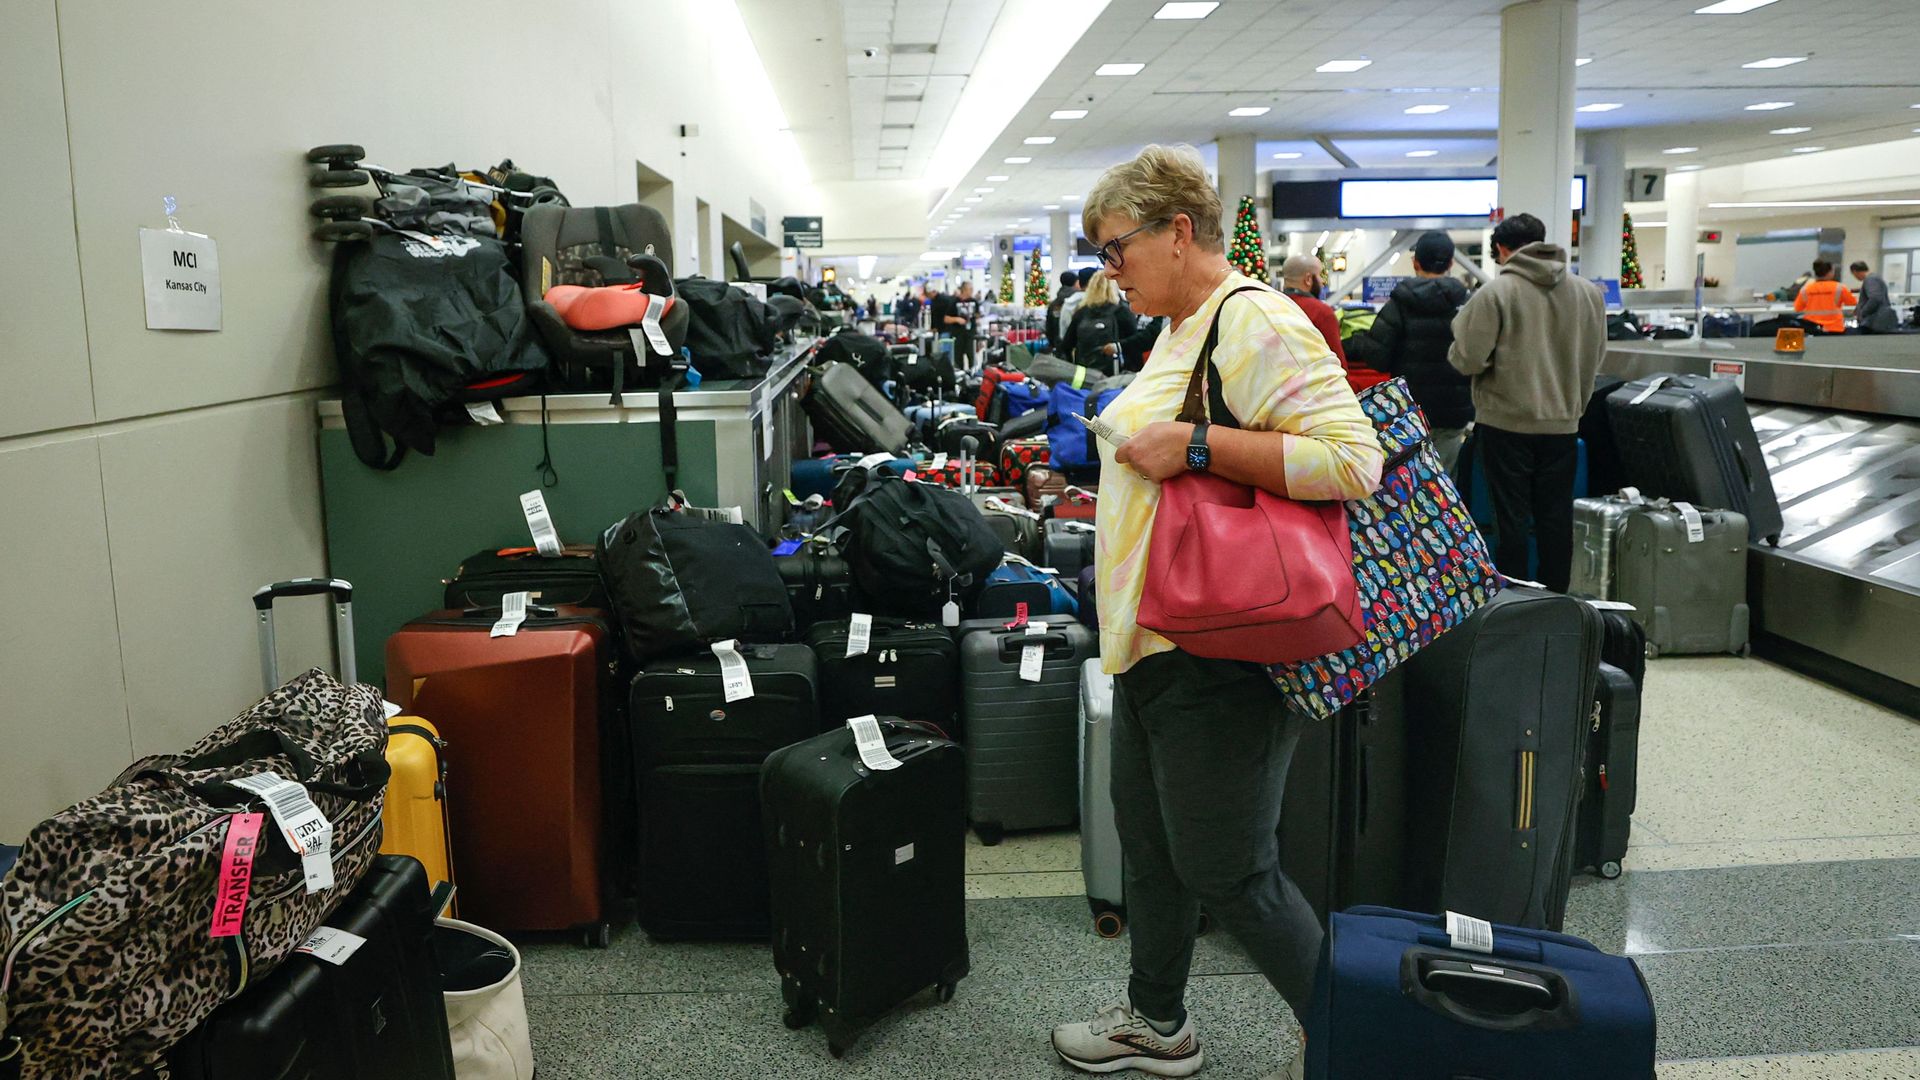 Stranded Southwest Airlines passengers looks for their luggage in the baggage claim area at Chicago Midway International Airport in Chicago, Illinois, on December 28, 202